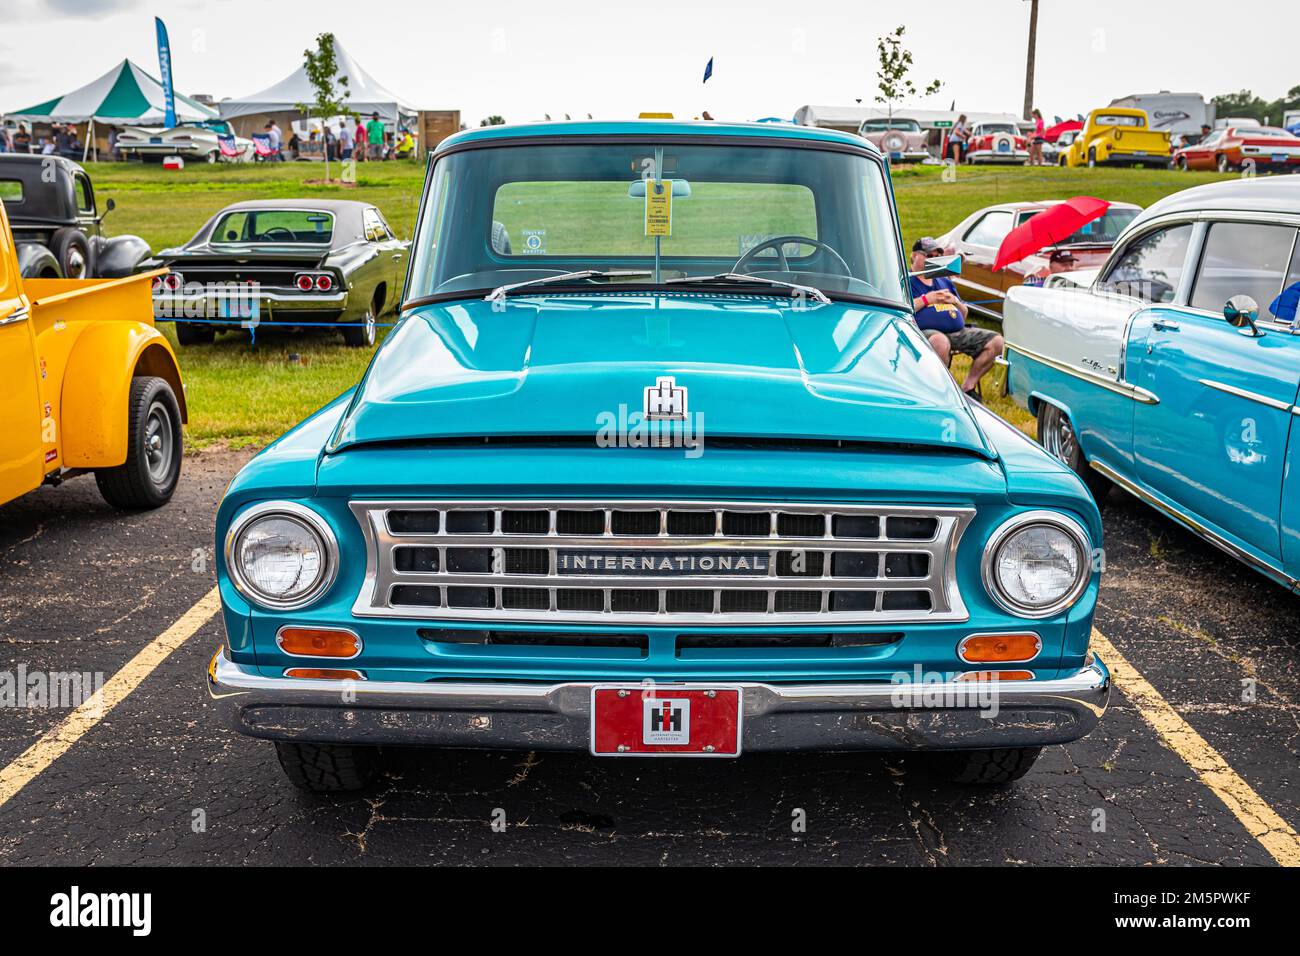 Iola, WI - July 07, 2022: High perspective front view of a 1963 International Harvester C1000 Pickup Truck at a local car show. Stock Photo